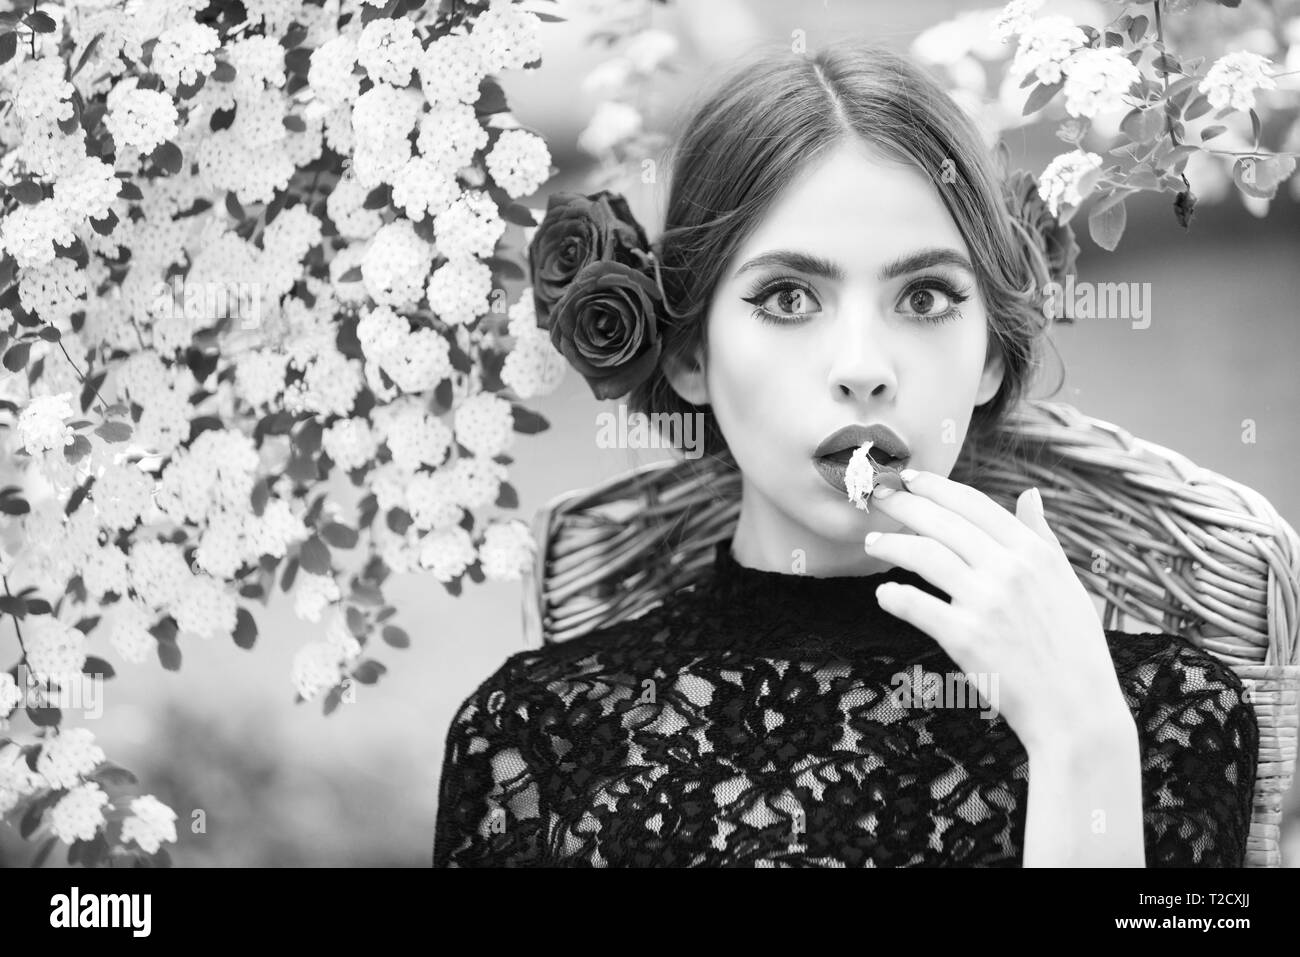 girl or cute woman with white flower in hand and stylish makeup on adorable face, with red roses in brunette hair, hairstyle, sitting on floral enviro Stock Photo